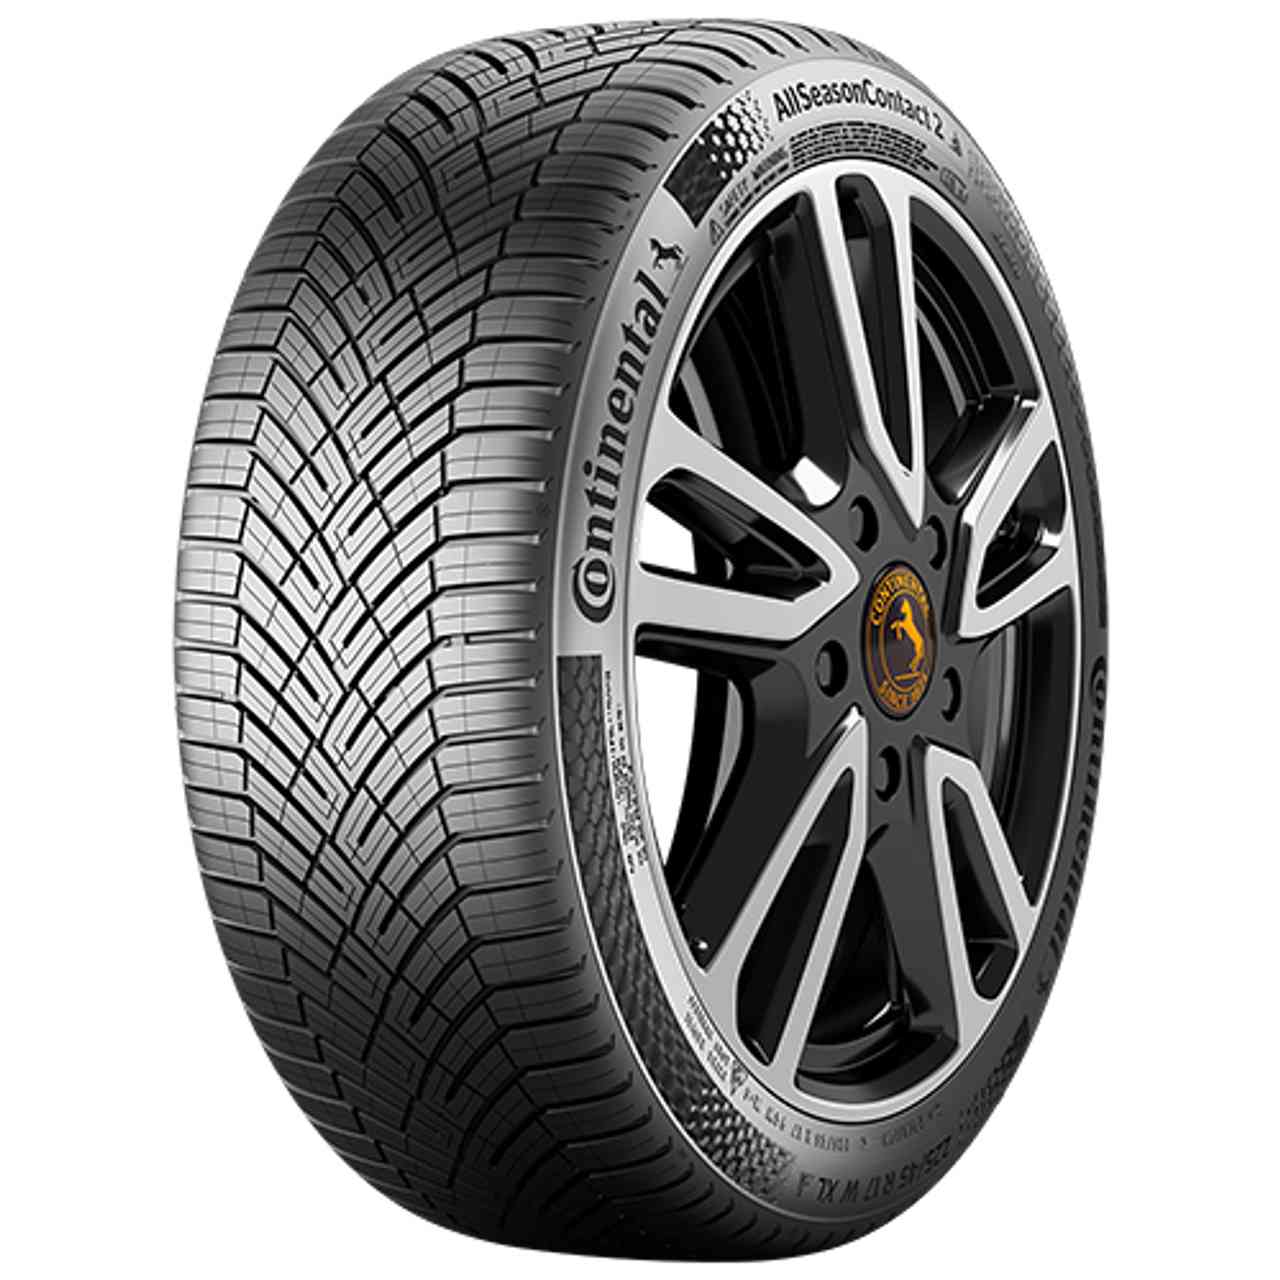 CONTINENTAL ALLSEASONCONTACT 2 (EVc) 205/60R16 96H BSW